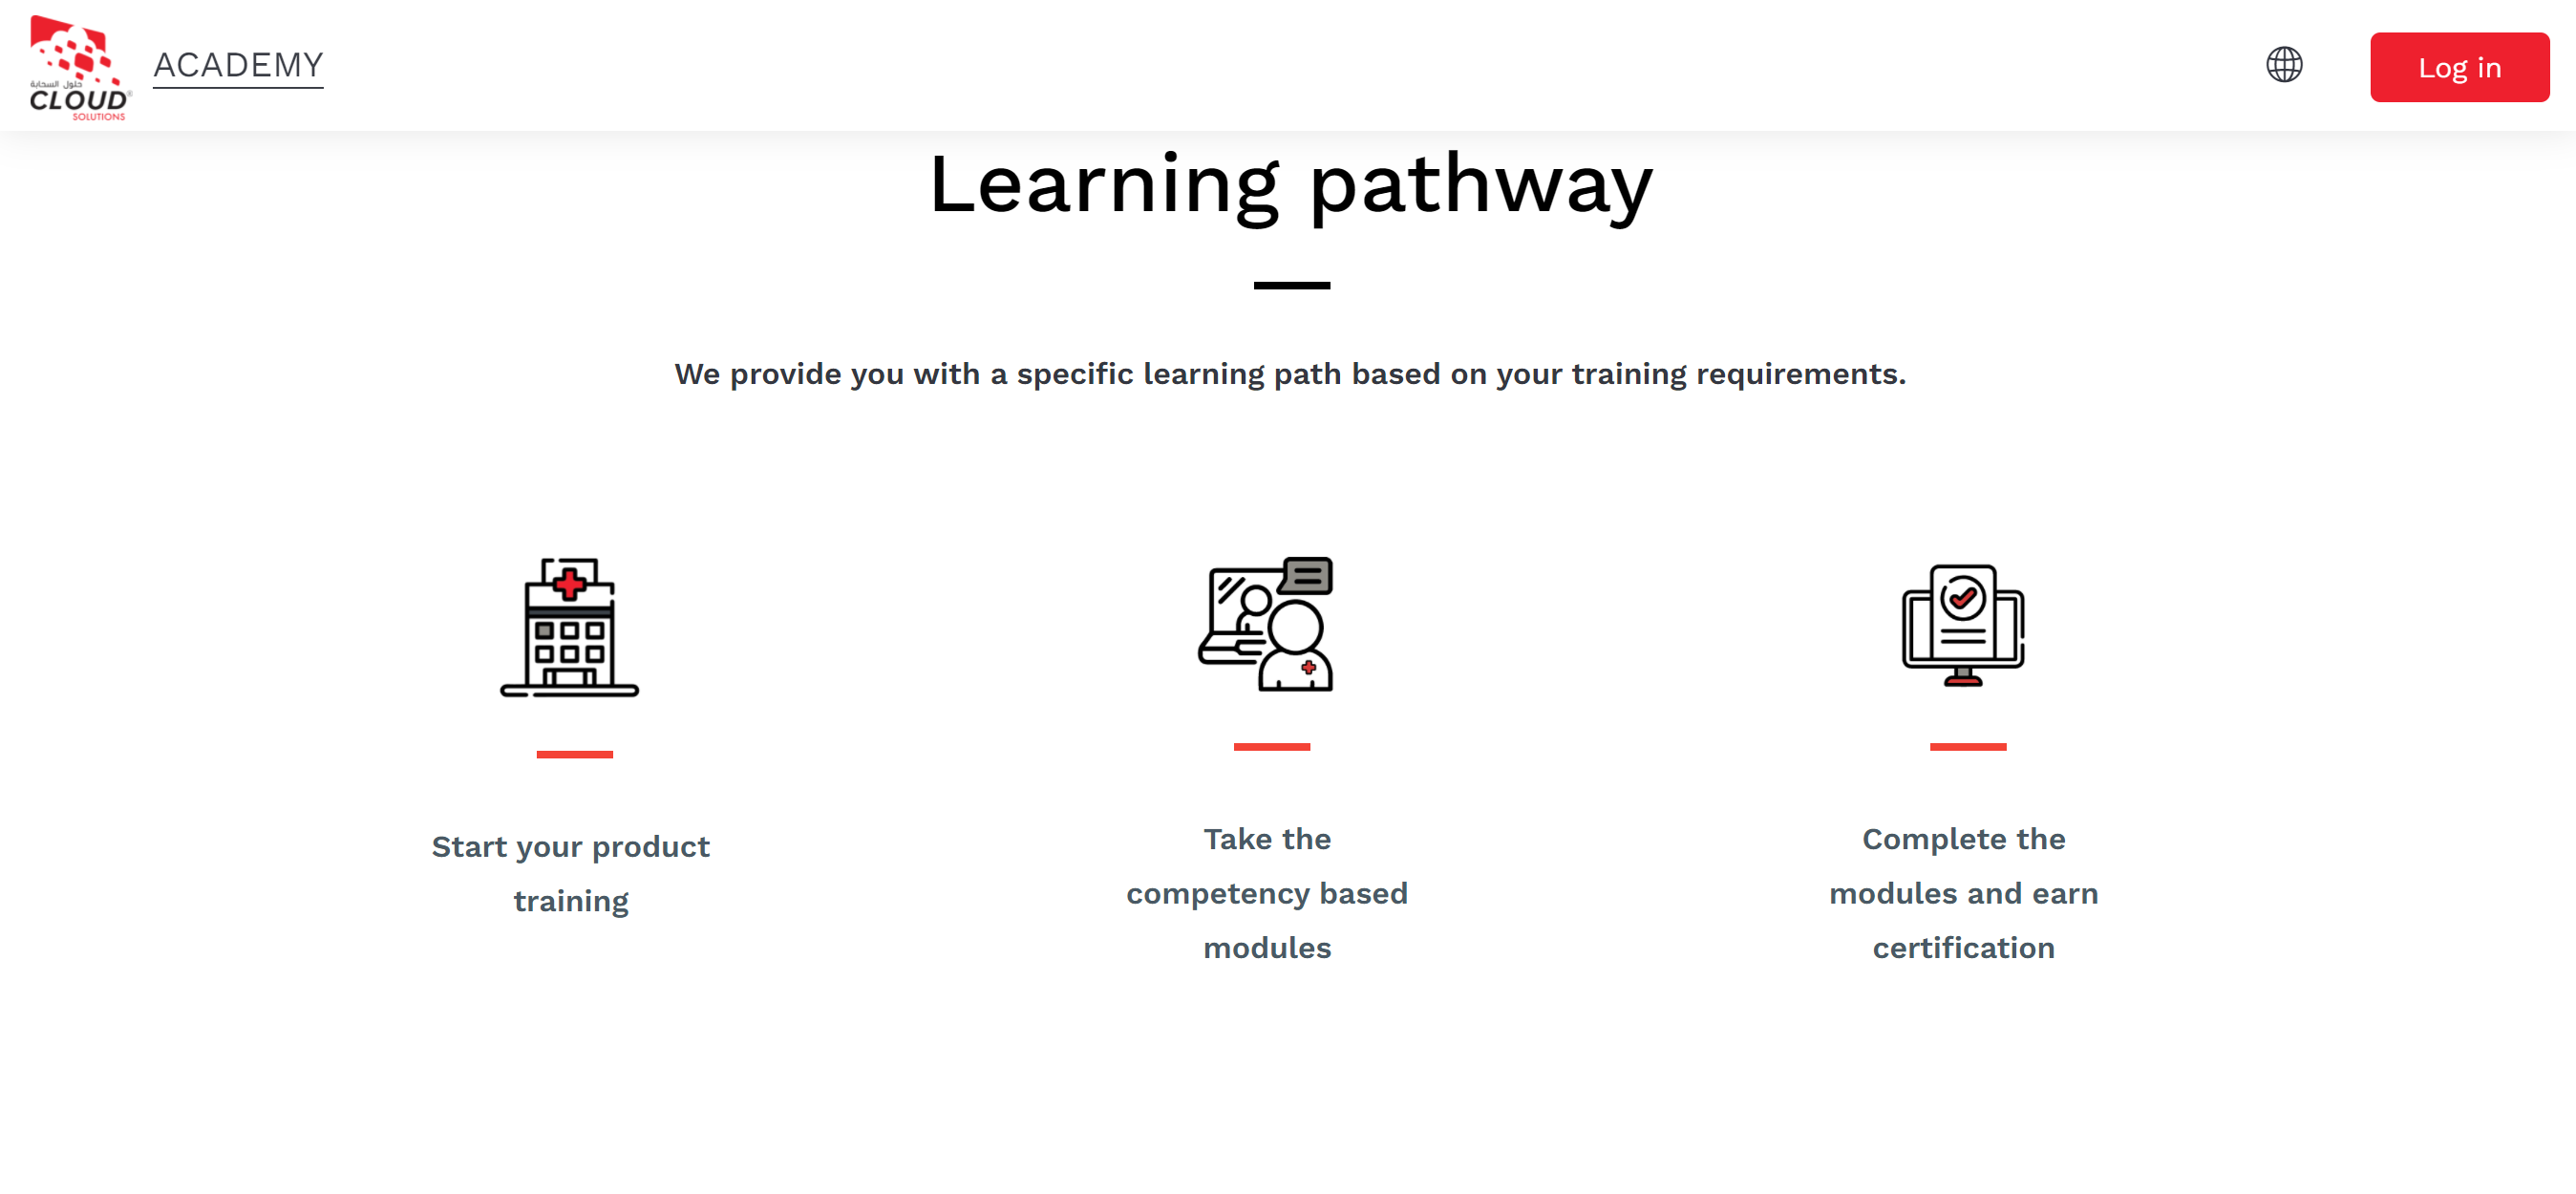 Cloud Solutions Support's Moodle site showing 3 learning paths available for their users, based on their training requirements: Start your product training; Take the competency based modules; Complete the modules and earn certification